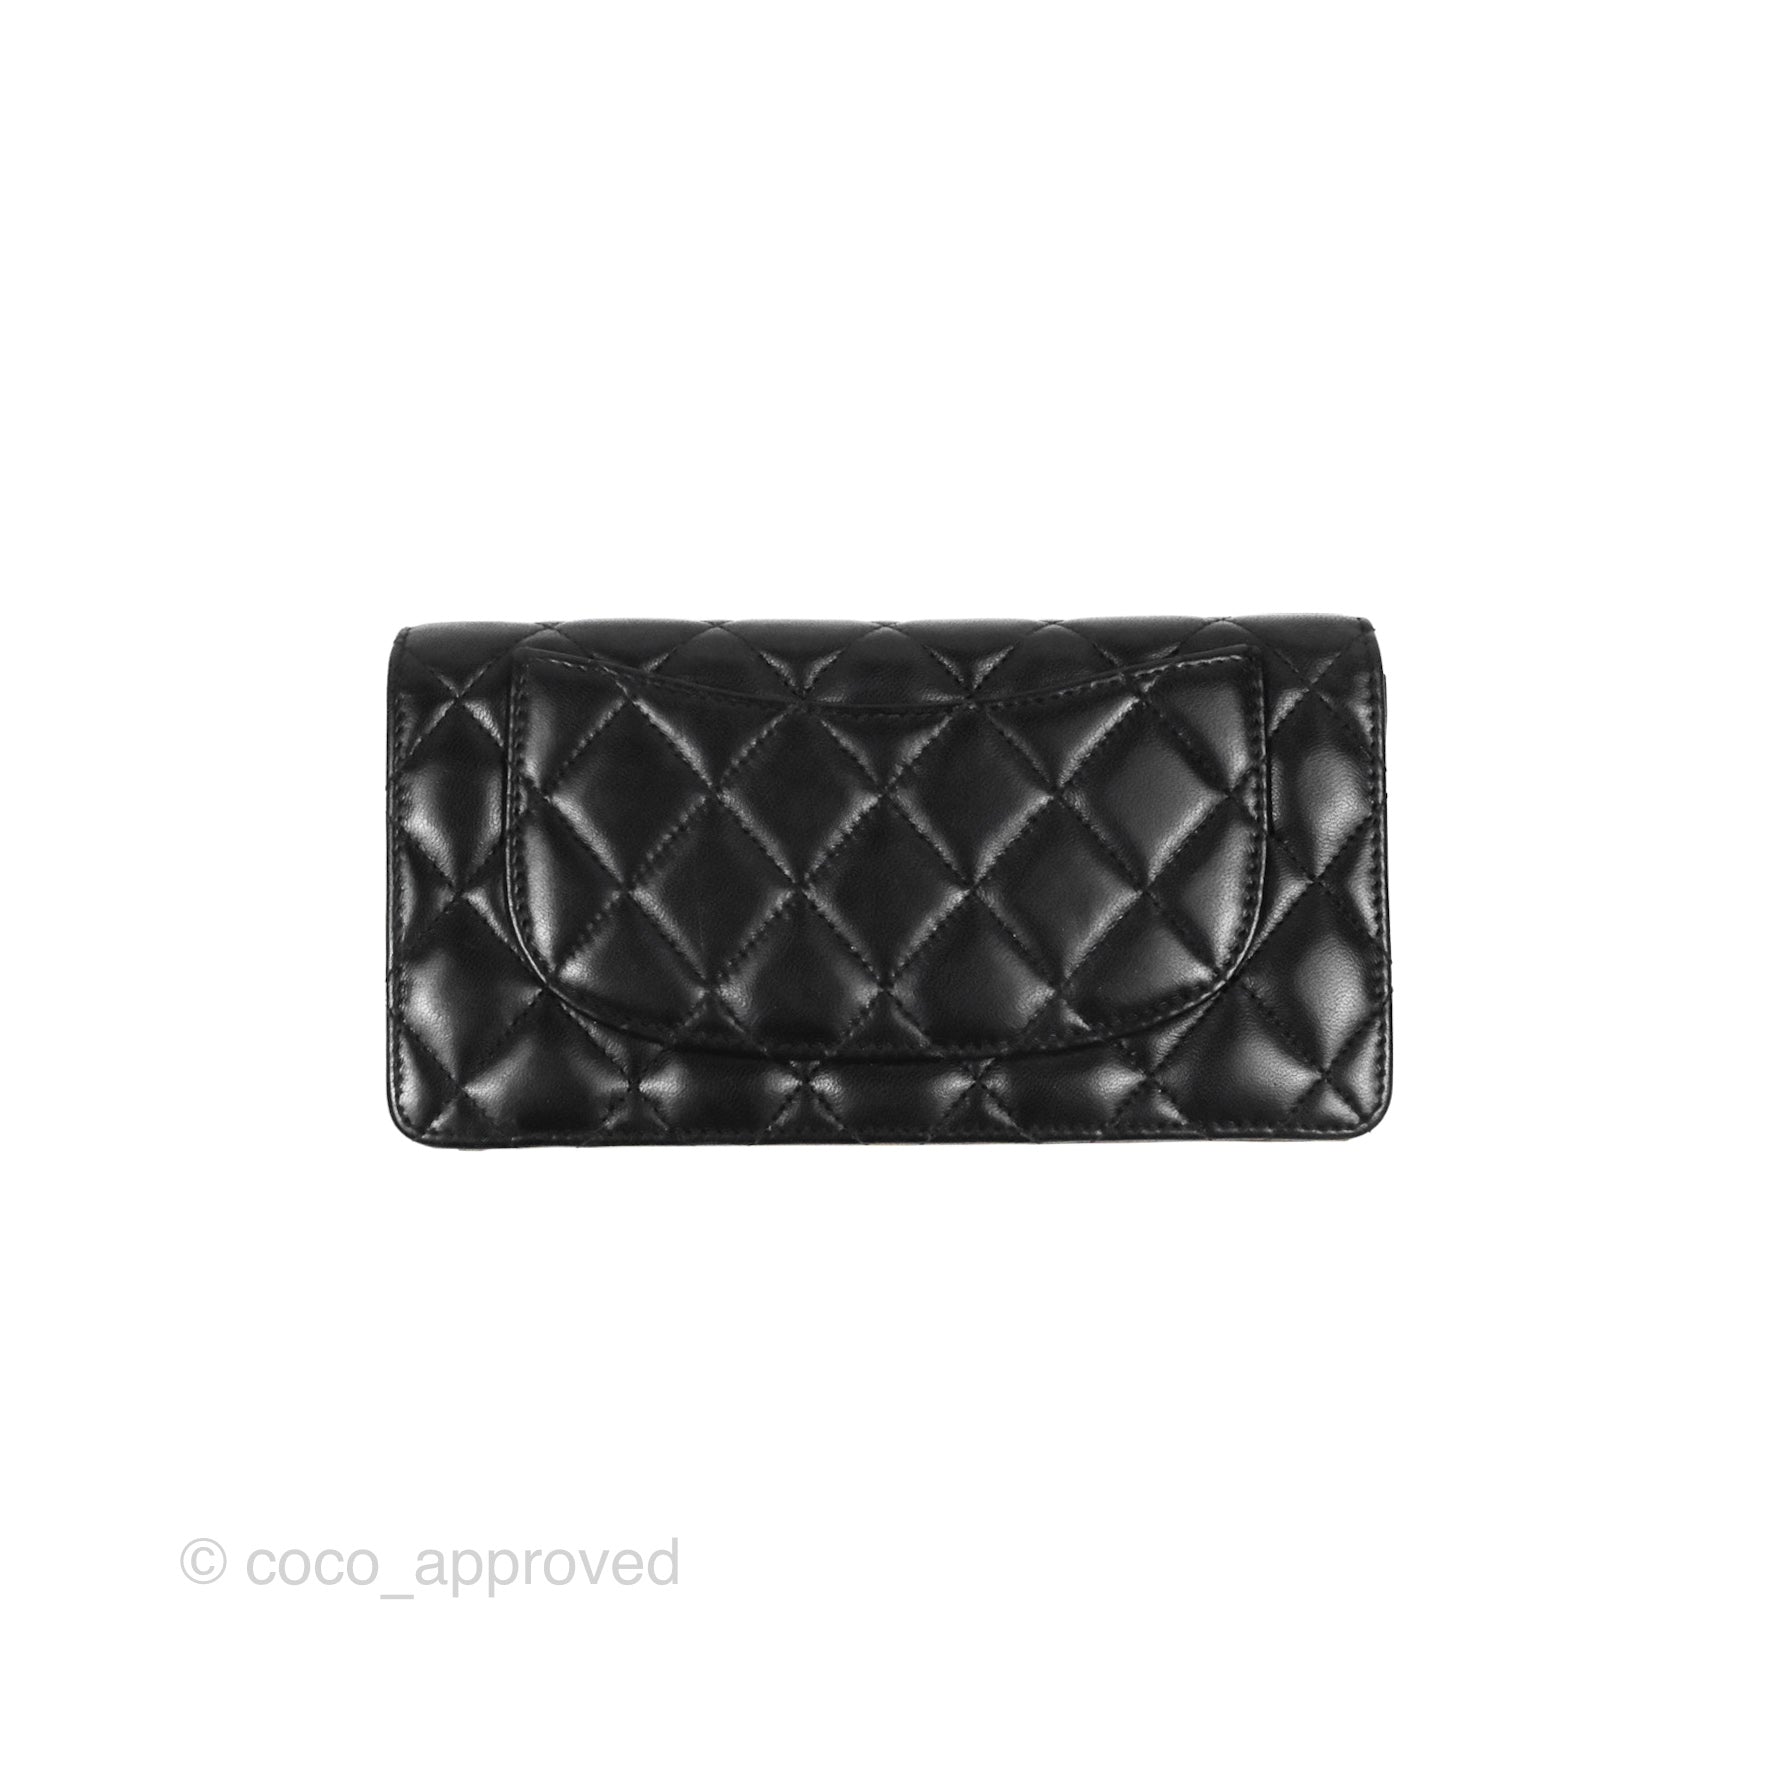 Black Quilted Patent Leather Large Box with Chain Gold Hardware